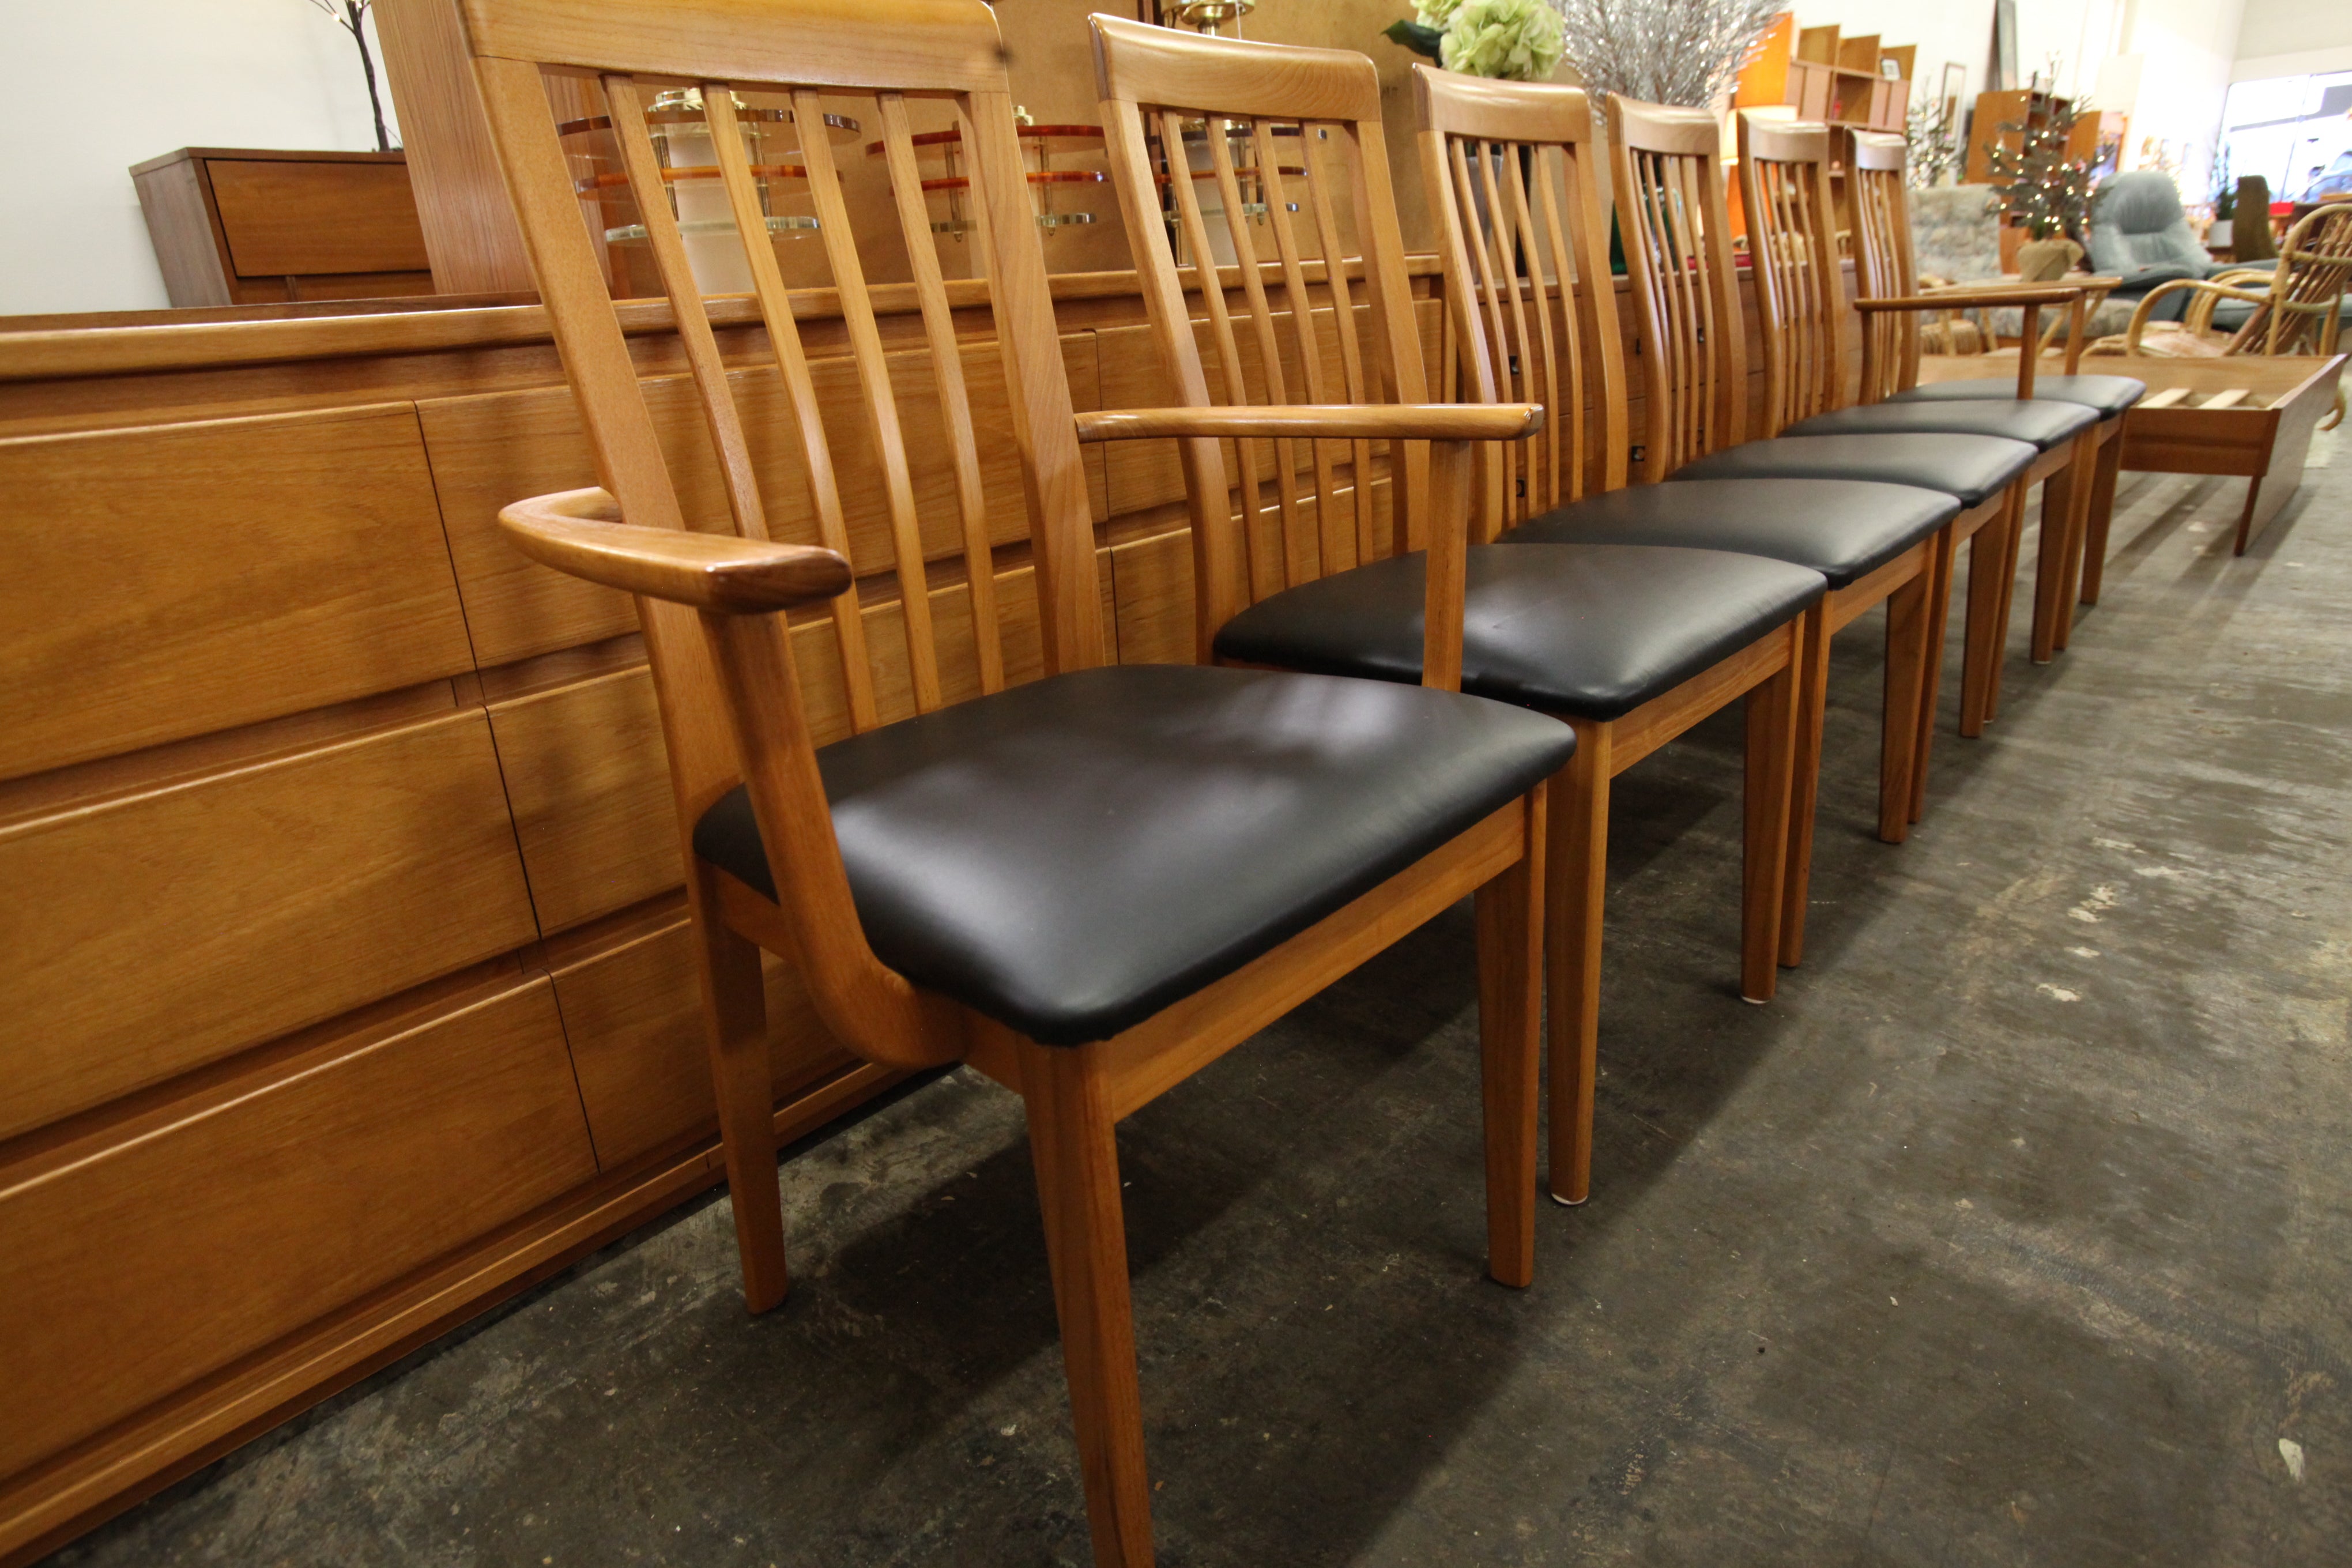 Set of 6 Vintage Teak Dining Chairs w/ 2 arm chairs